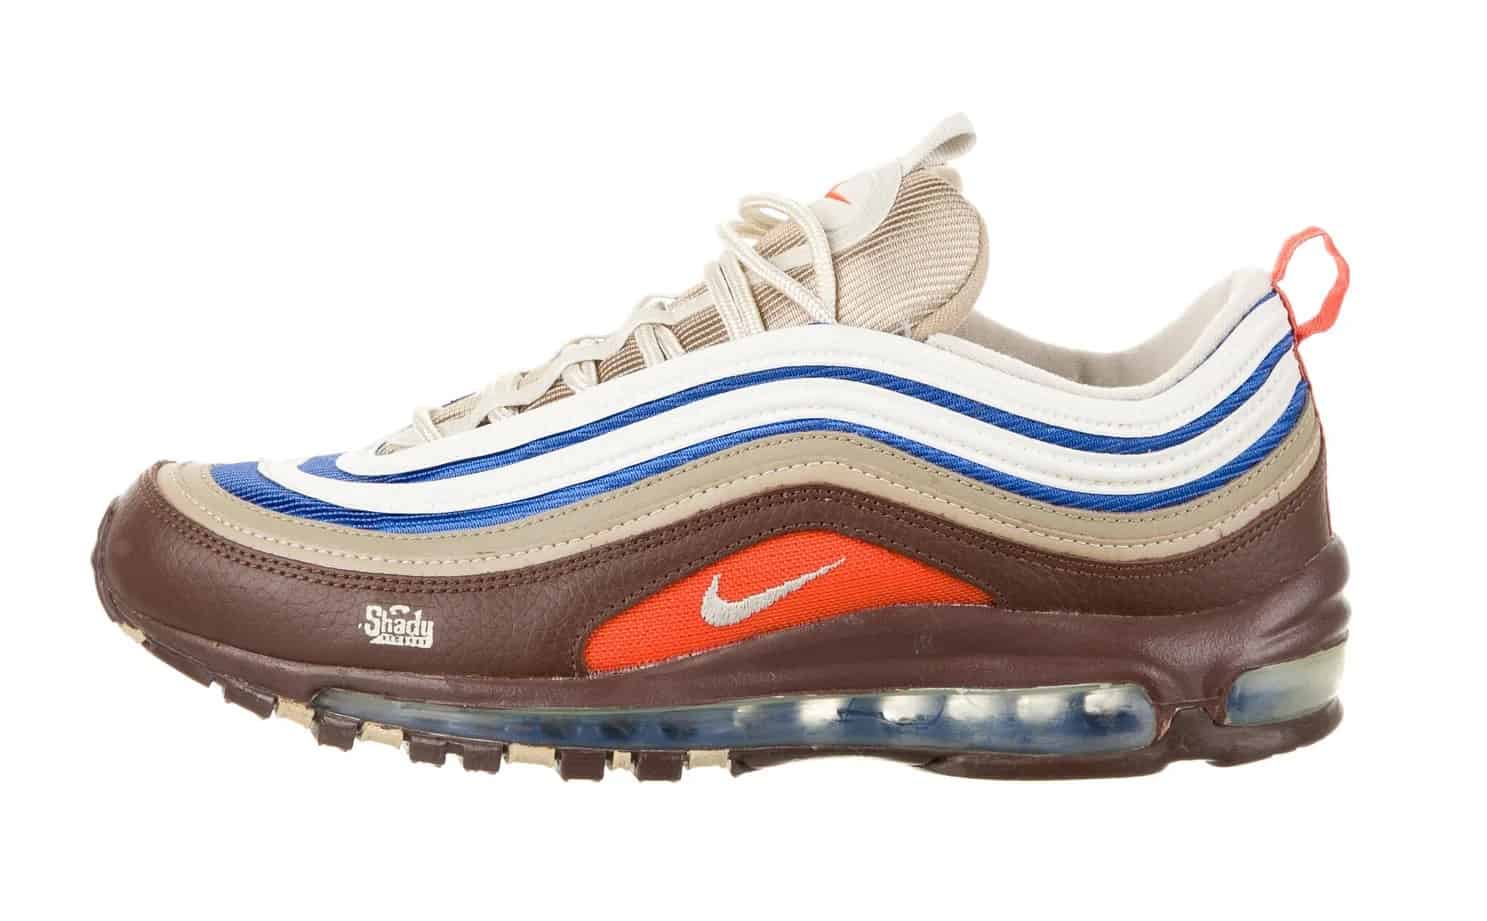 Eminem's Rare "Shady Records" Nike Air Max 97 Goes Sale For A Massive Price